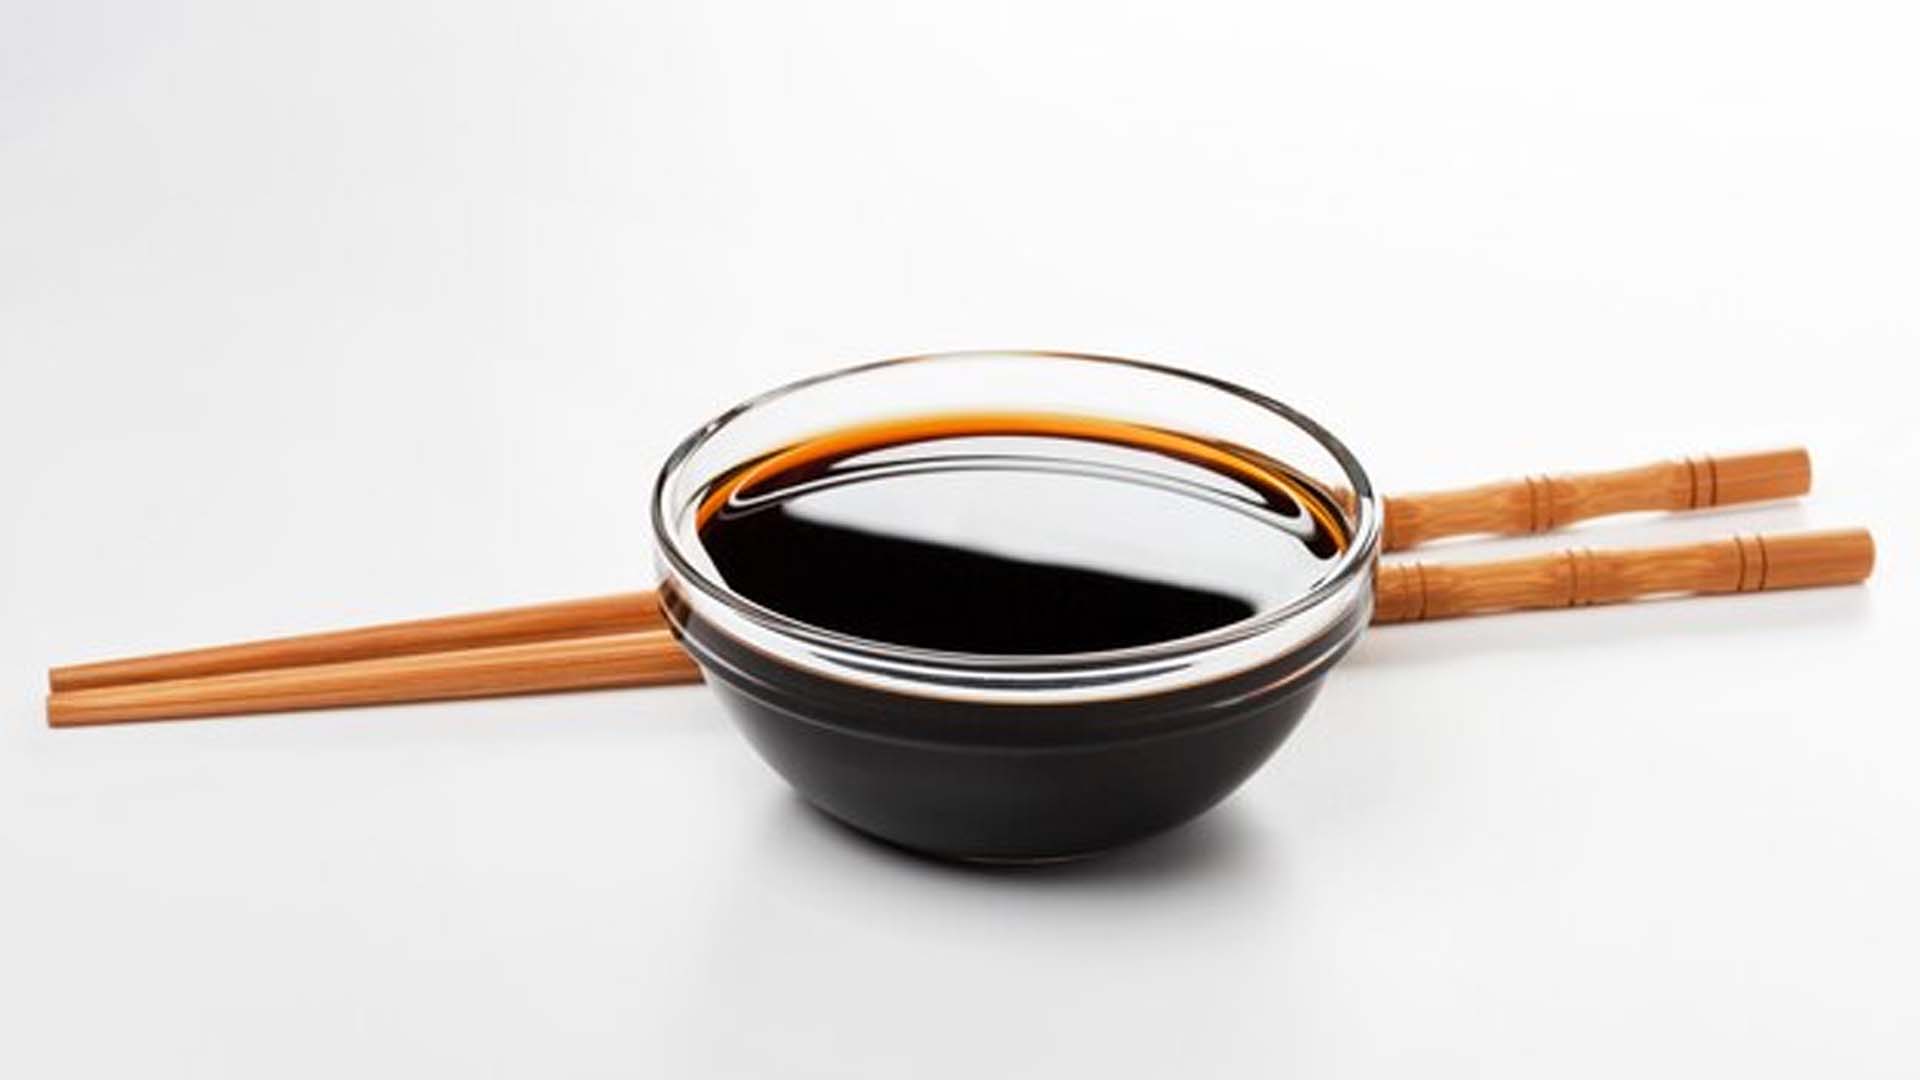 Soy Sauce and chopsticks